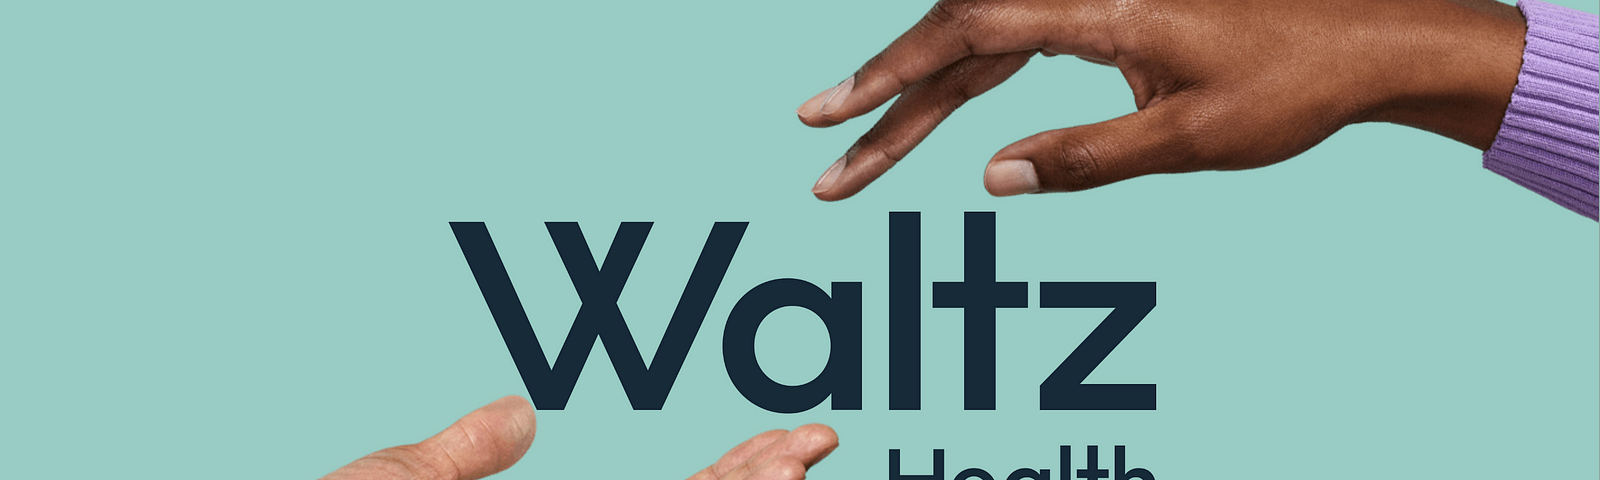 Waltz Health is bringing drug transparency to the market by rewiring the pharmaceutical supply chain